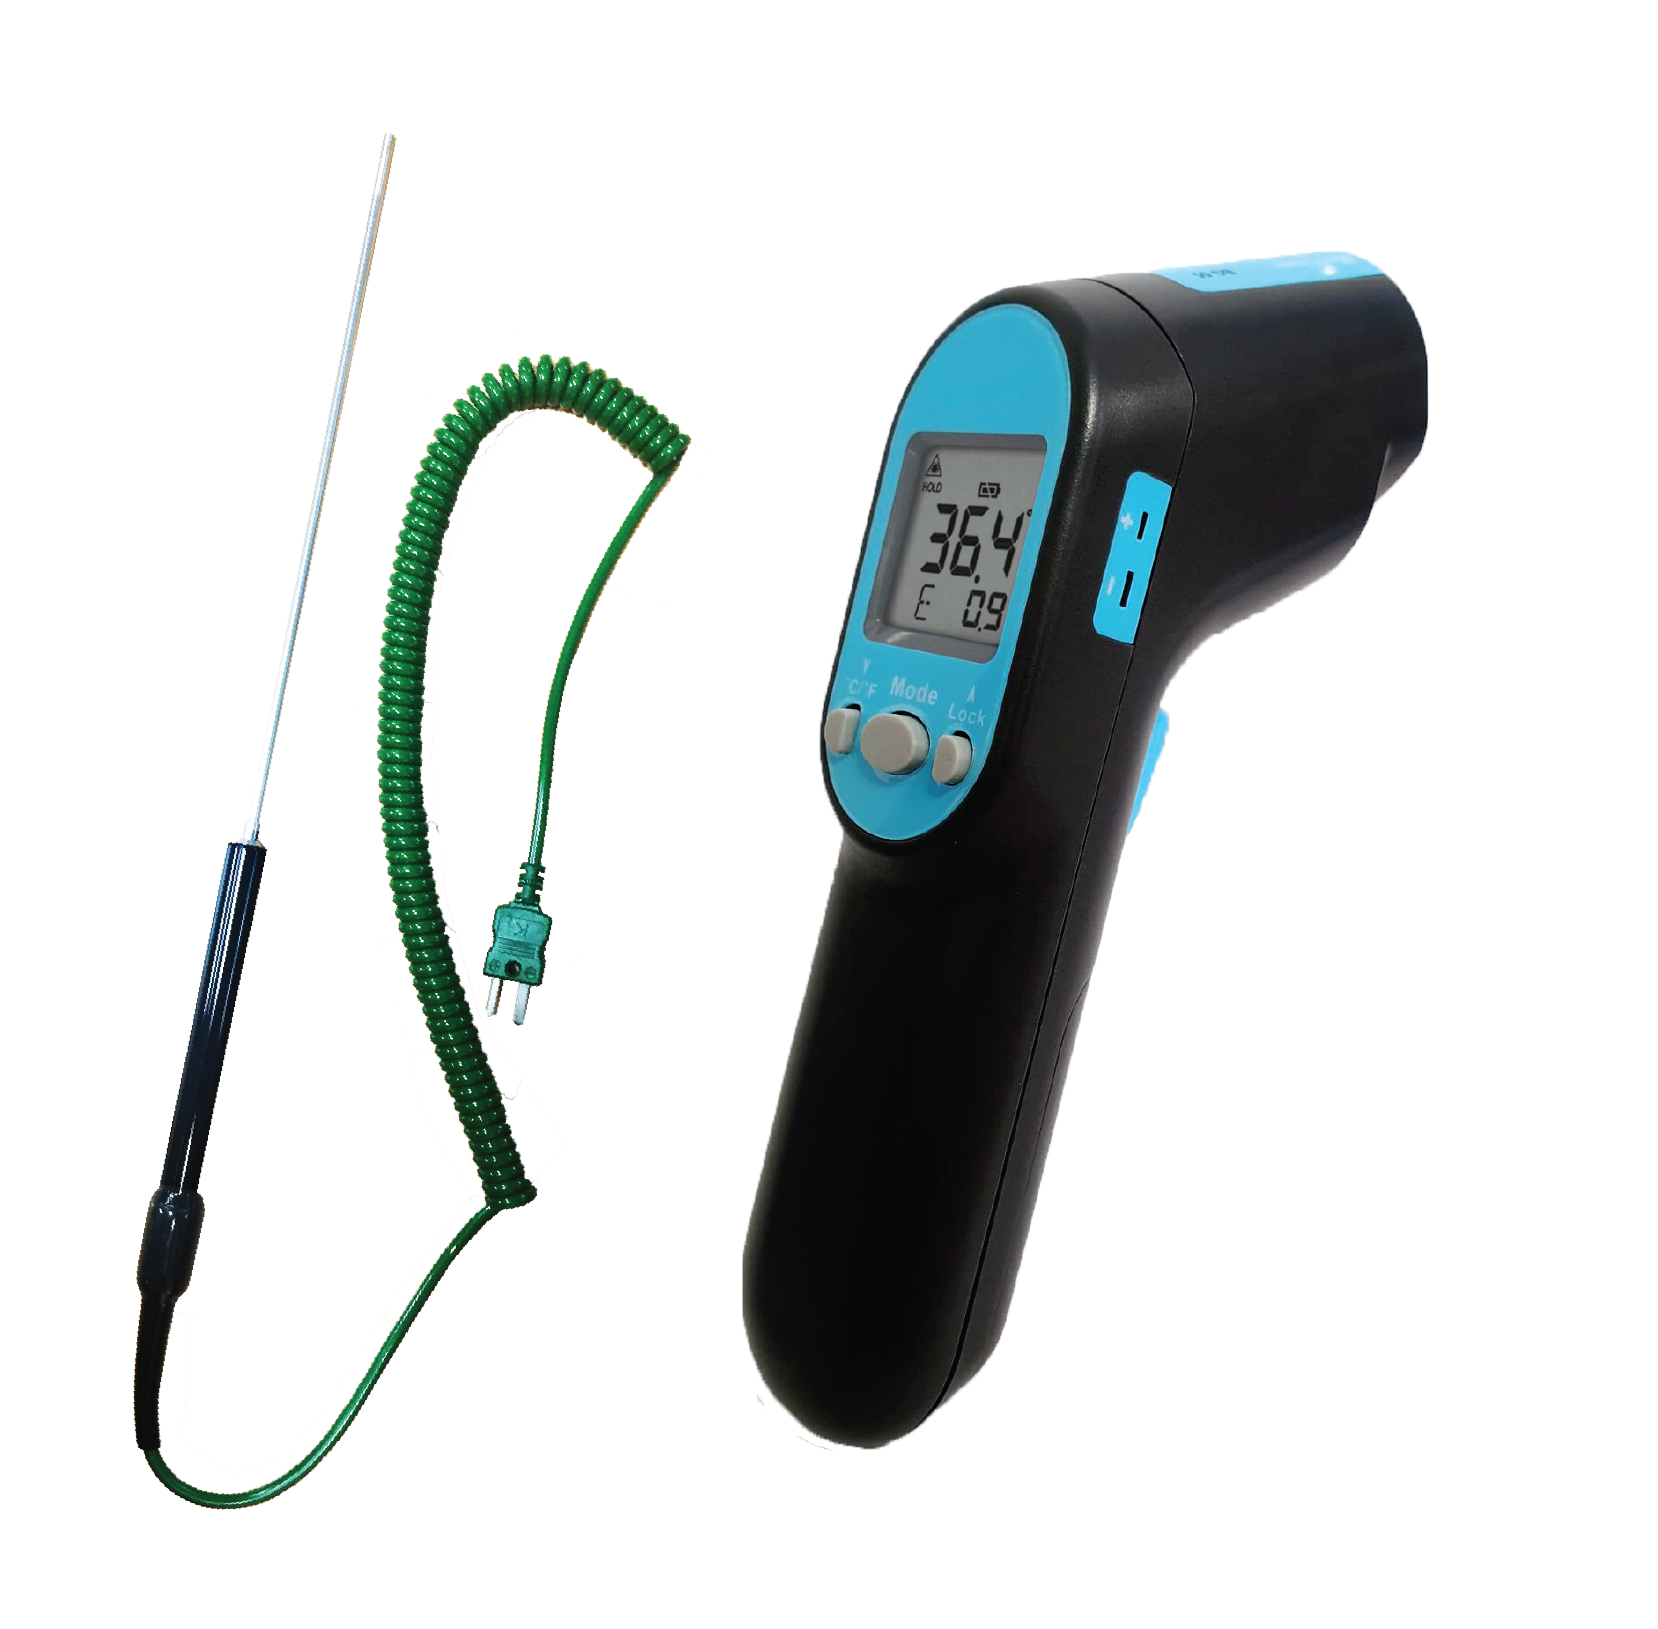 BG55, BLUE GIZMO IR THERMOMETER WITH K-TYPE THERMOCOUPLE BUILT-IN-JACK